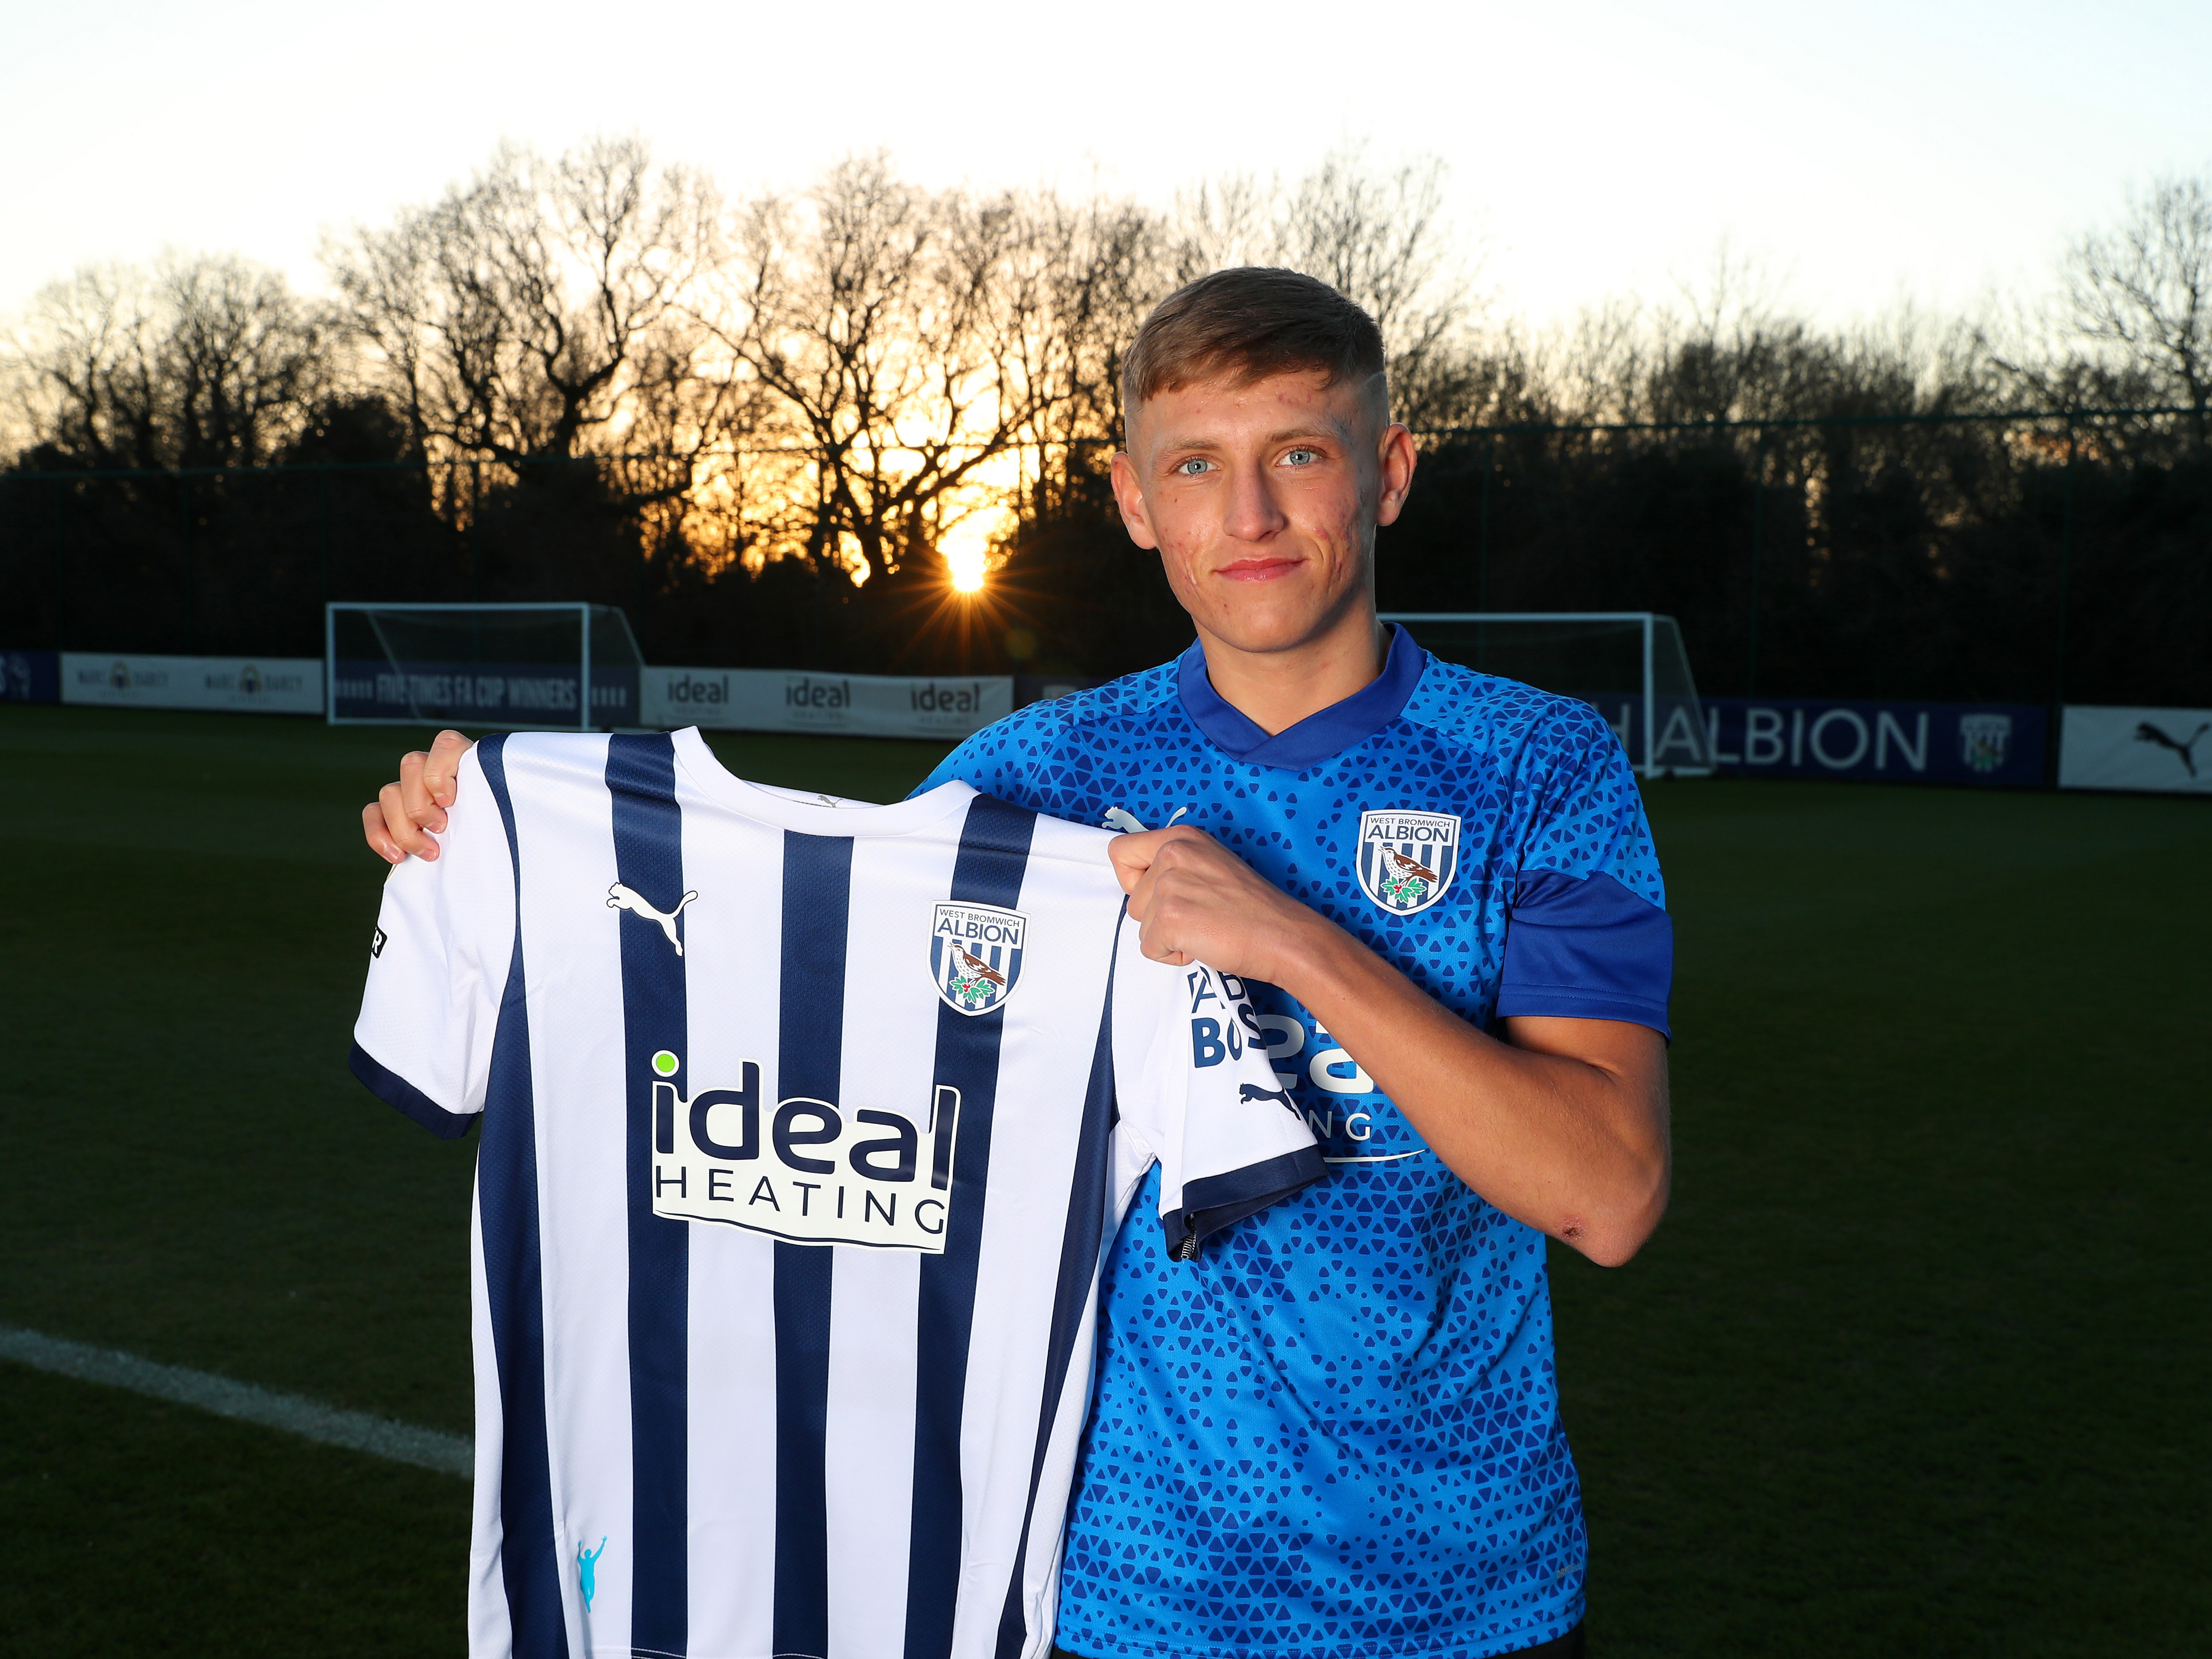 Callum Marshall holding up an Albion shirt while smiling at the camera